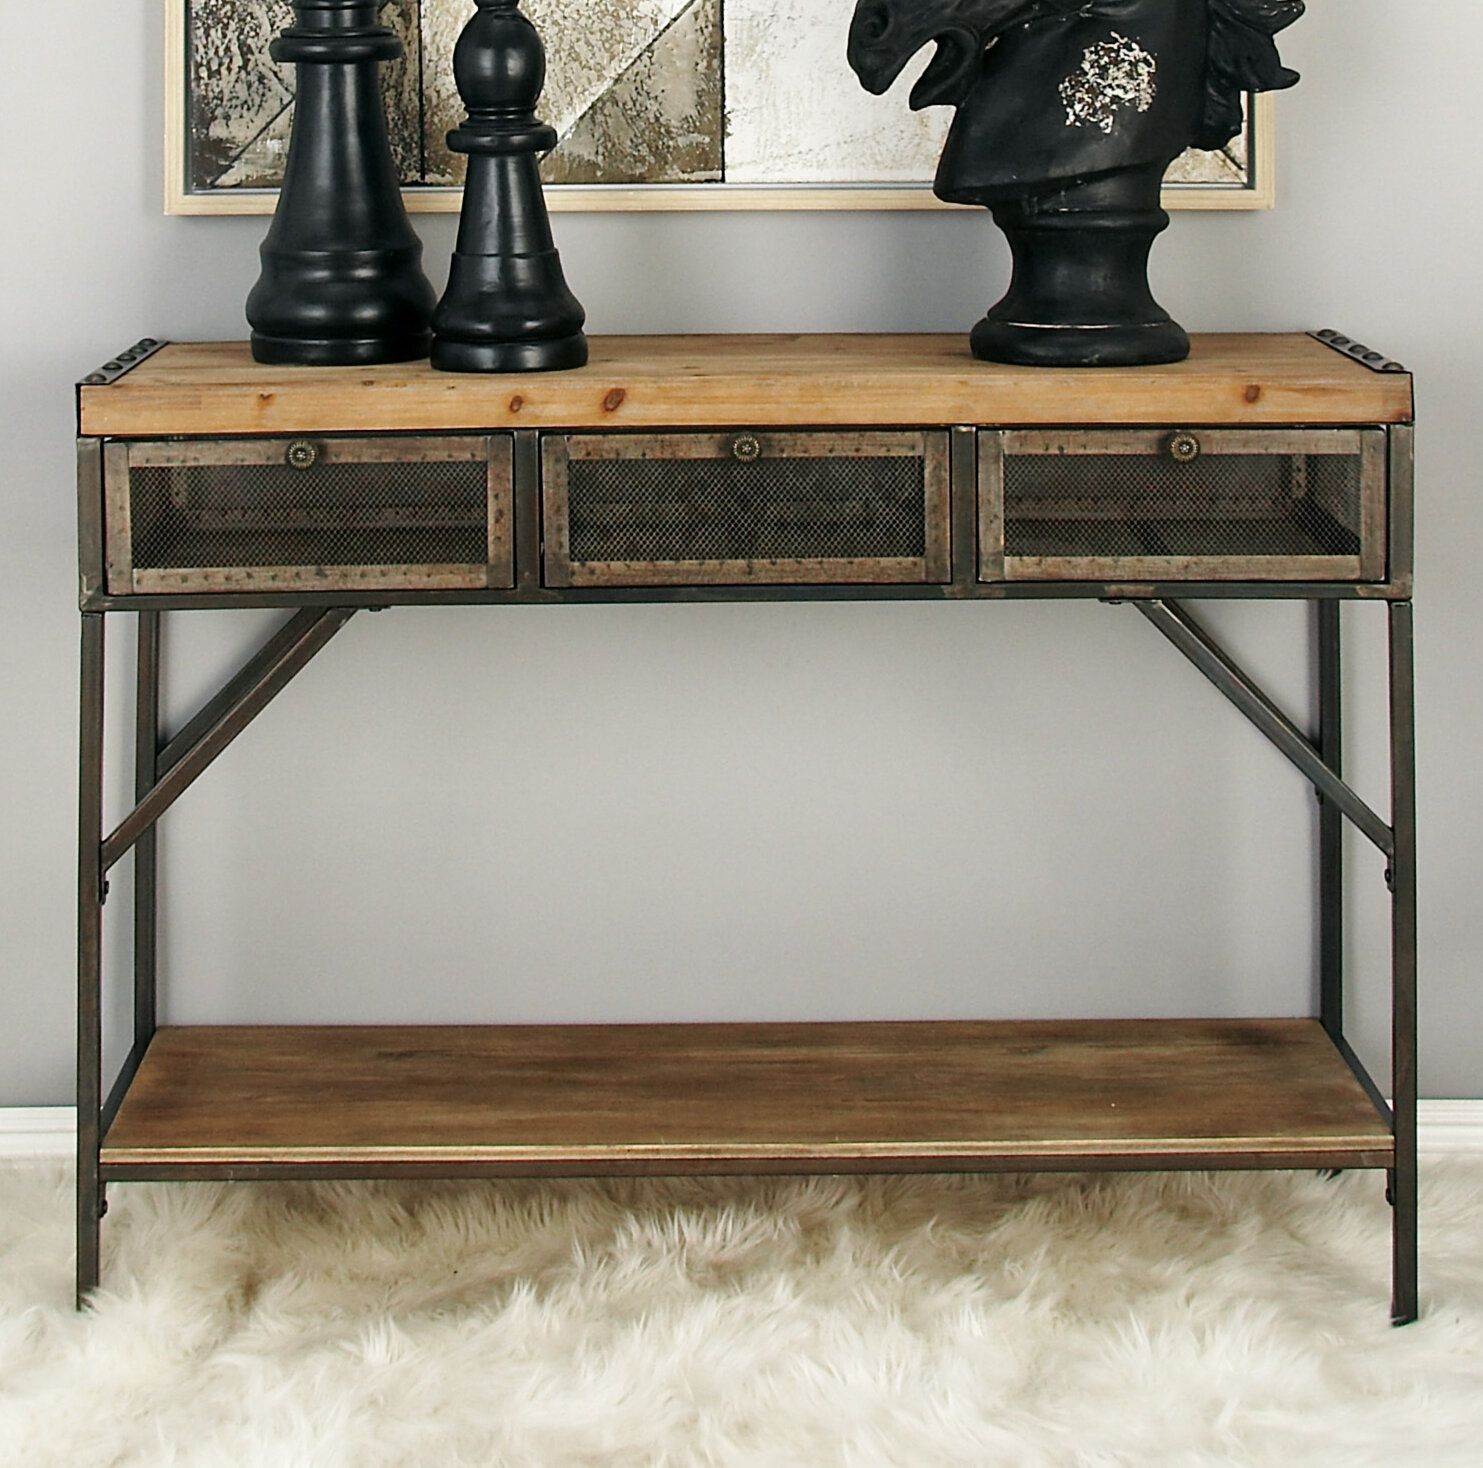 Cole & Grey Wood Metal Console Table & Reviews | Wayfair Regarding Gray Driftwood And Metal Console Tables (View 2 of 20)